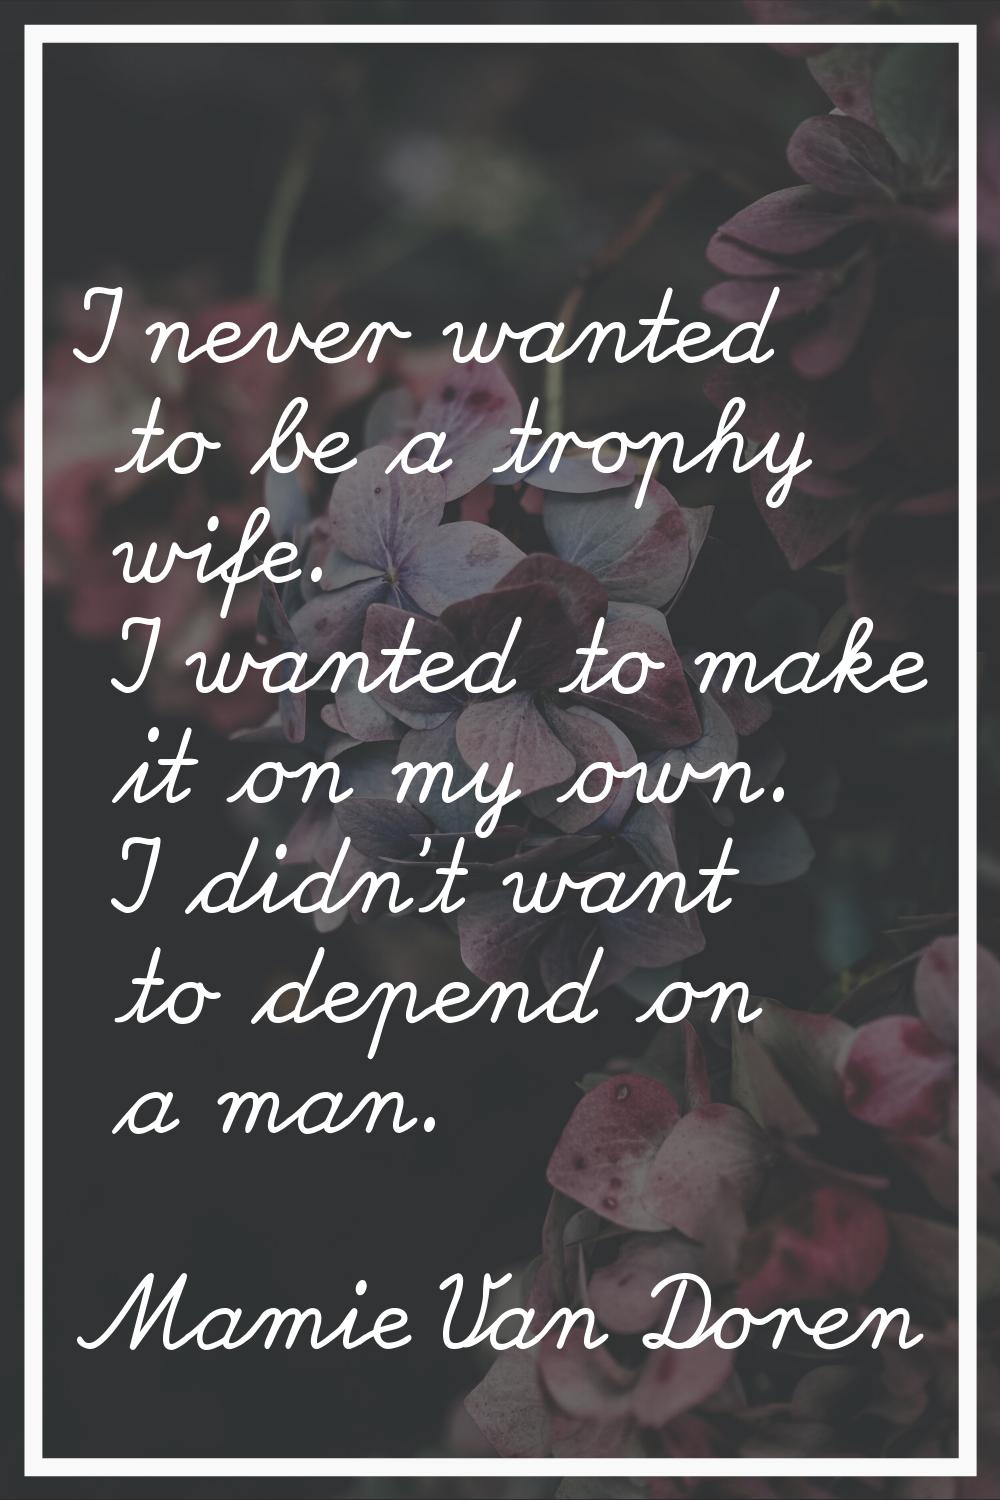 I never wanted to be a trophy wife. I wanted to make it on my own. I didn't want to depend on a man